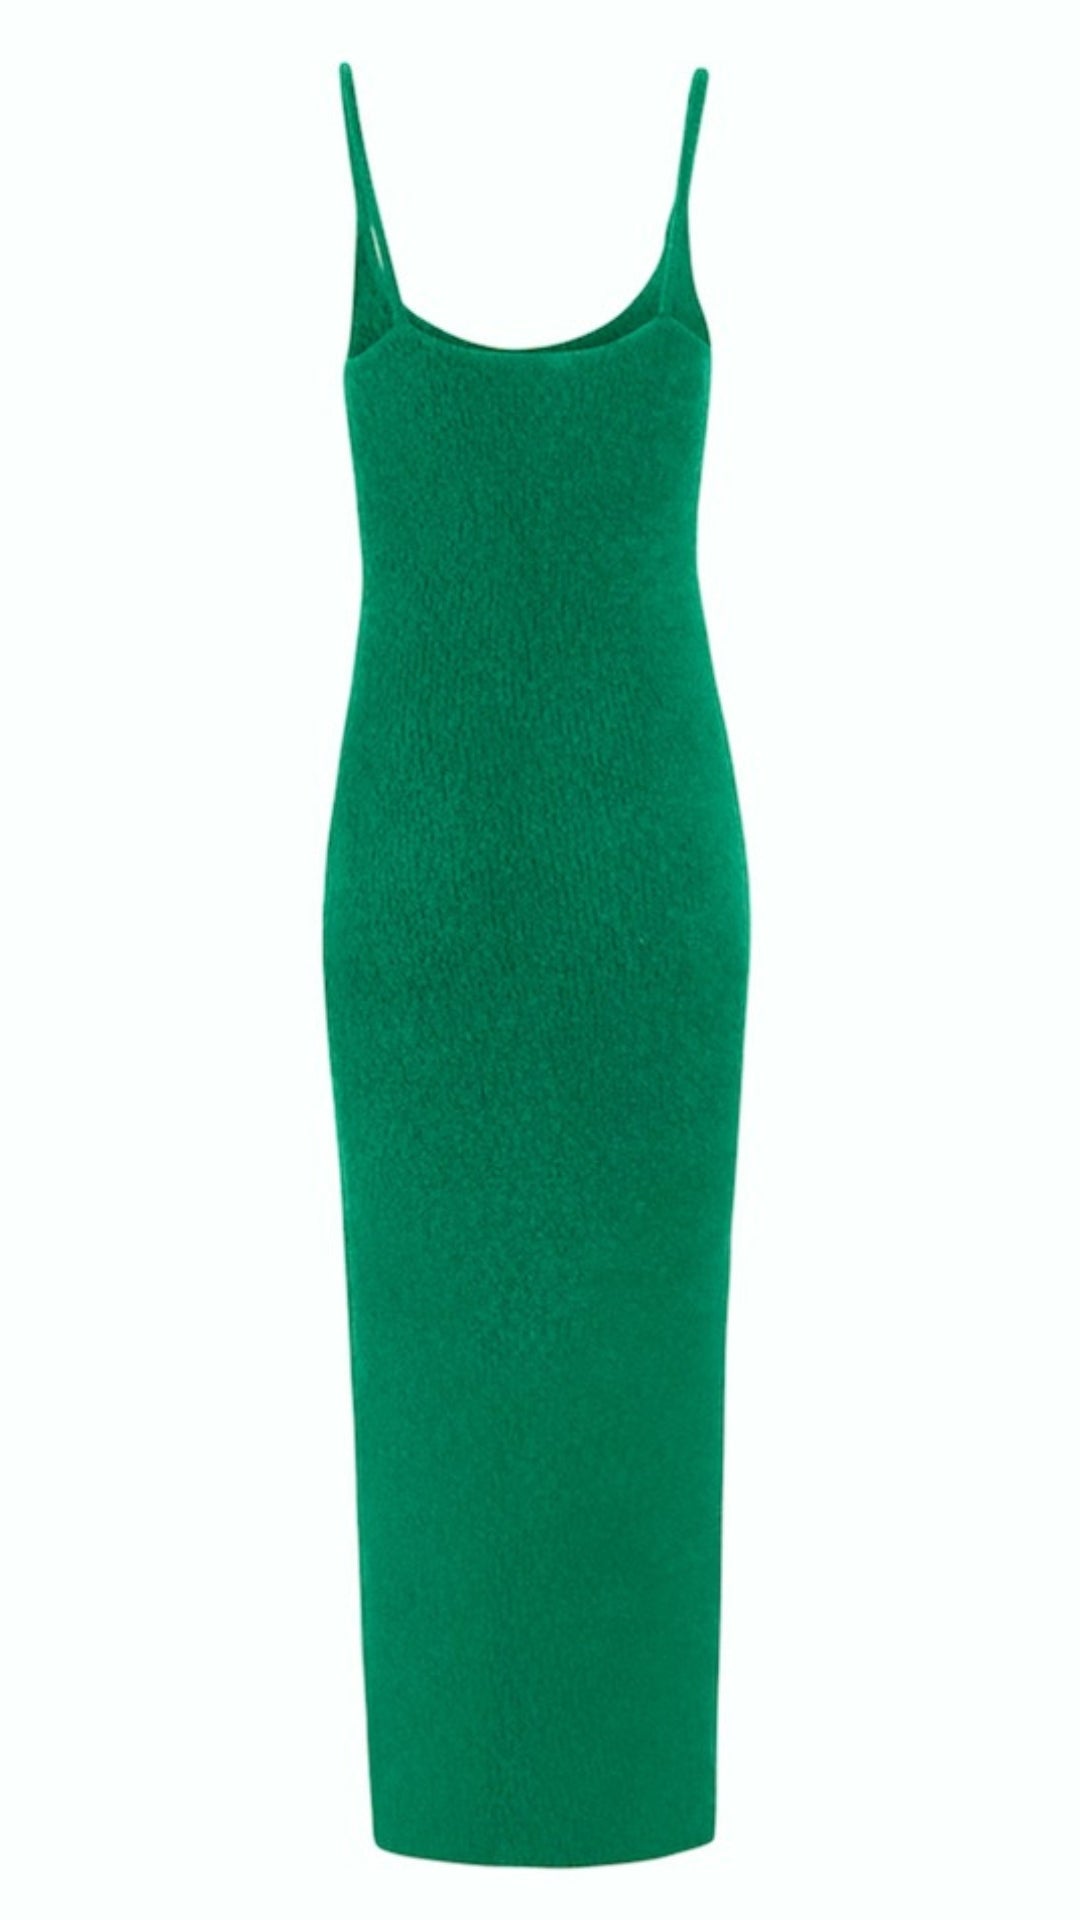 Alejandra Alonso Rojas Machine Knit Dress in Green. Crafted in the softest camel wool it is a form fitting dress with thin straps and falls to midi length. It has a slit to just above the knee on one side. Product photo showing back view.